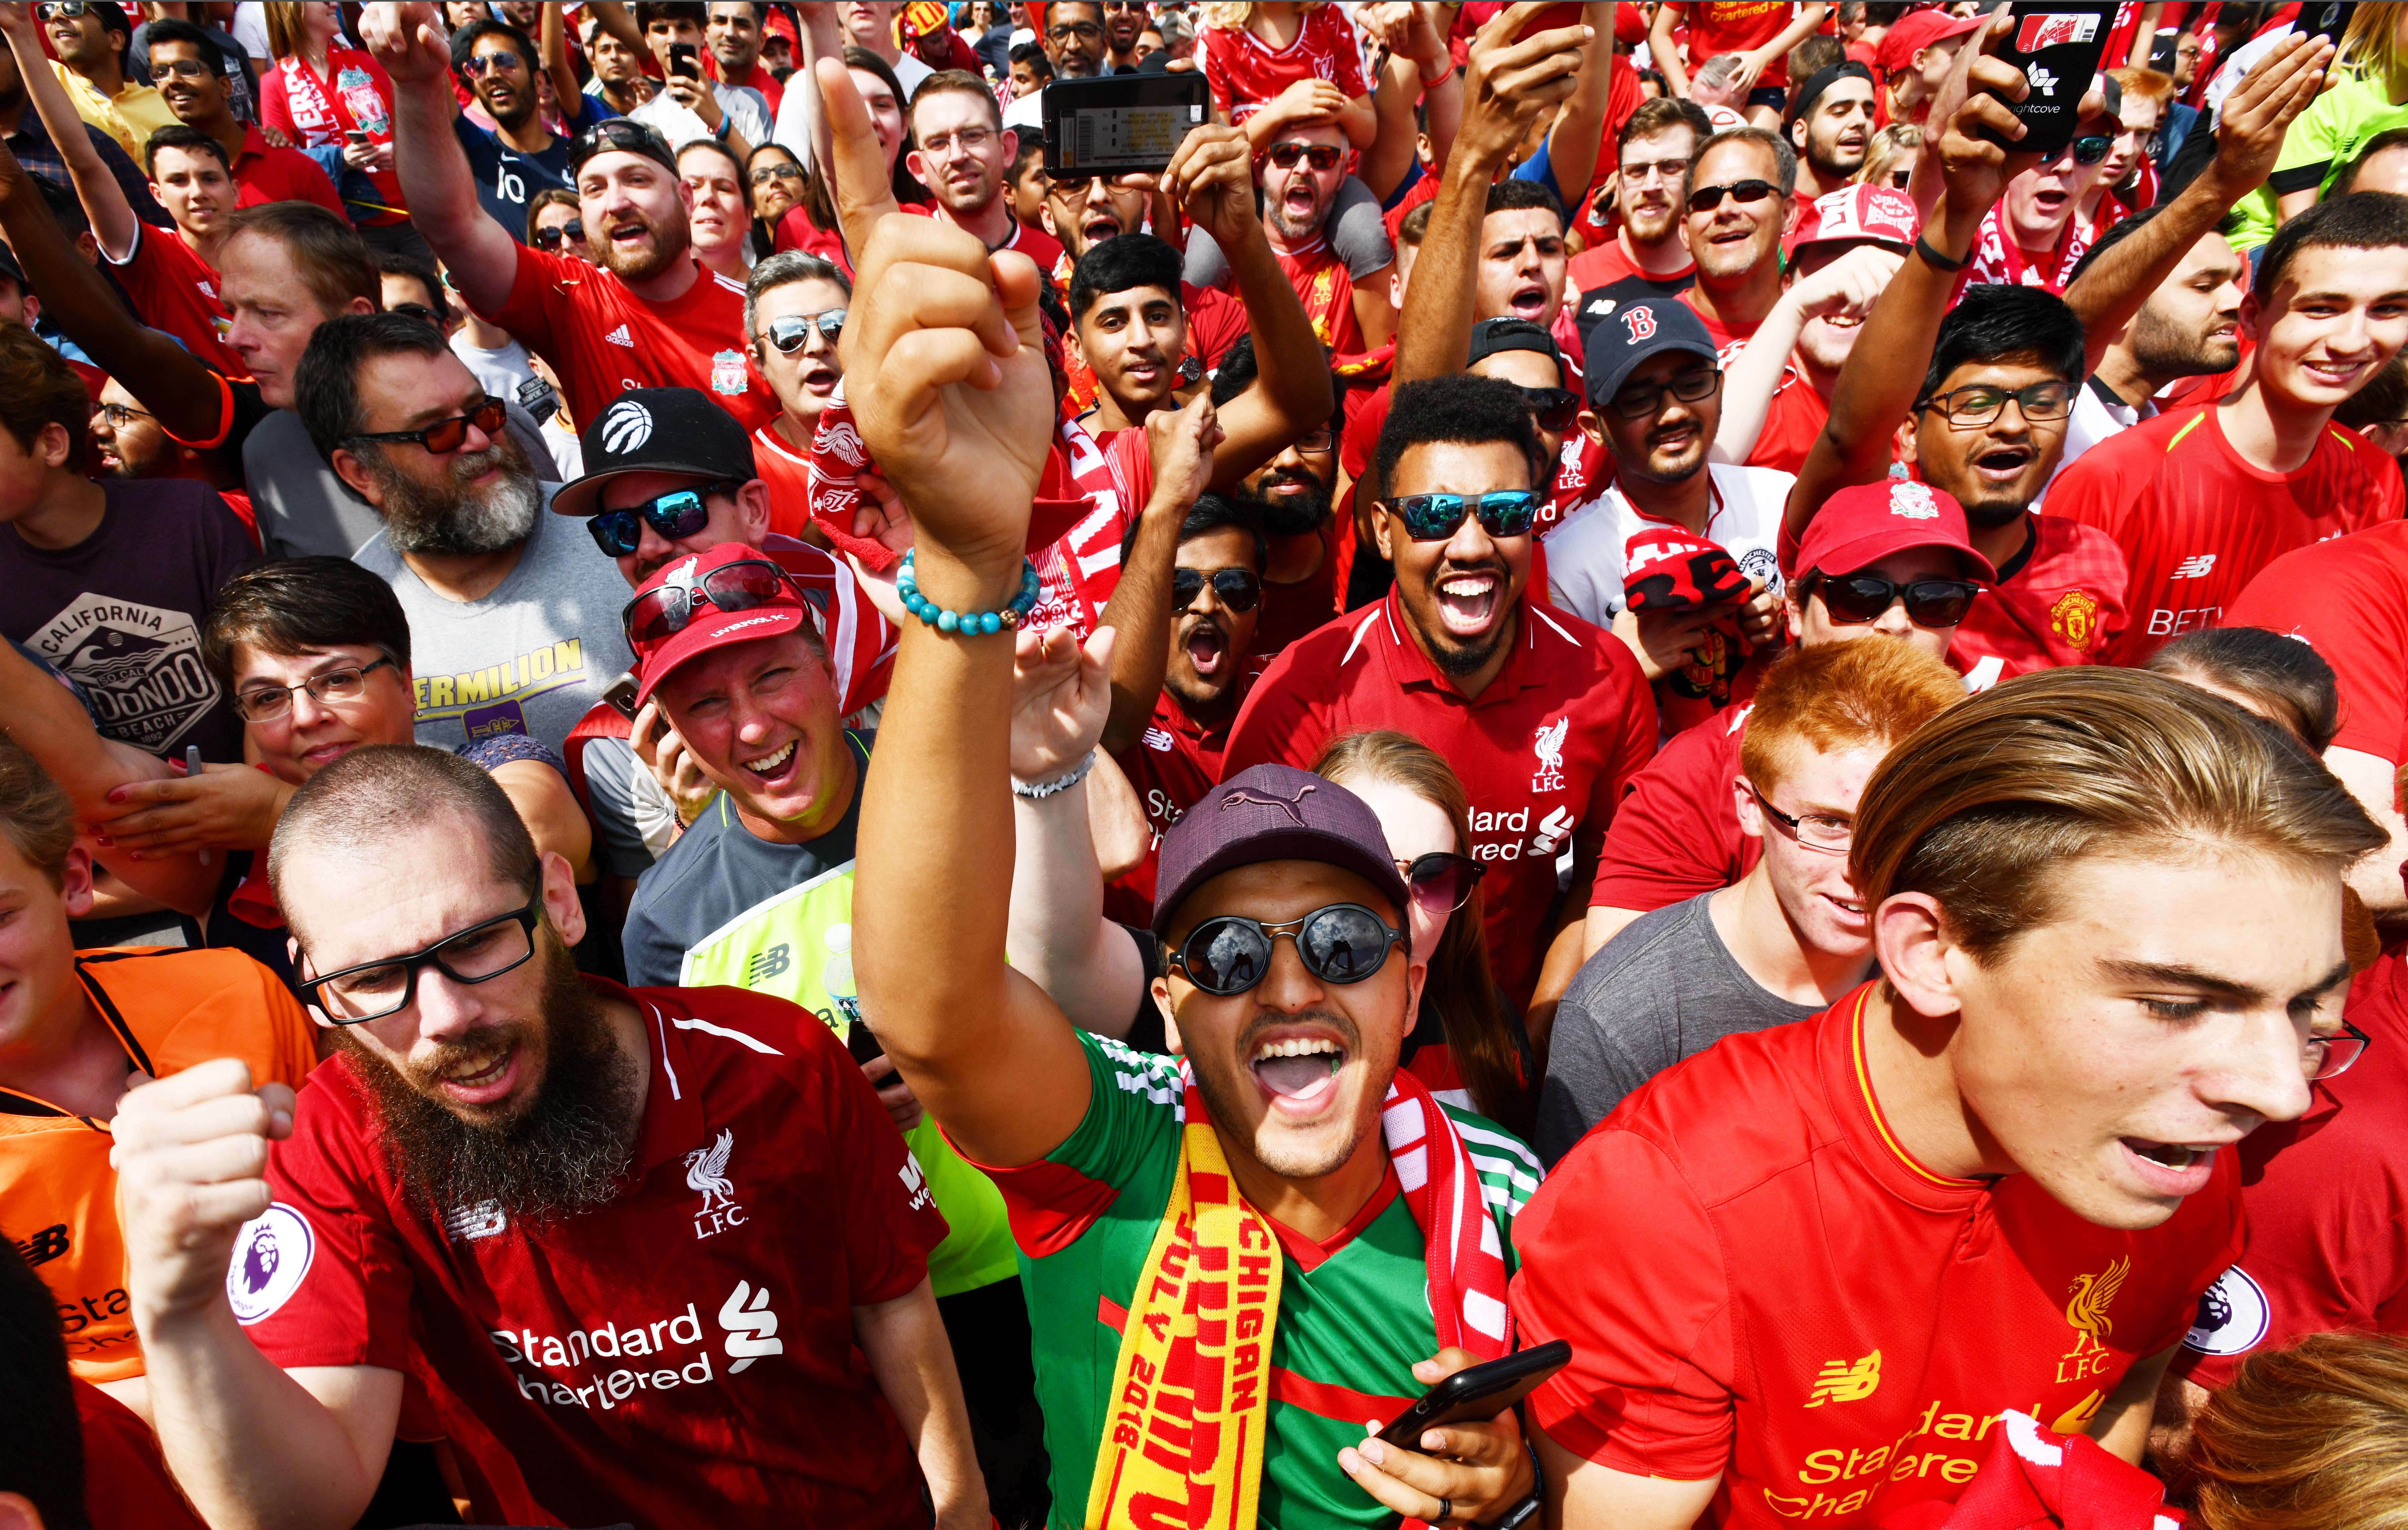 Manchester United and Liverpool fans cheer as they make their way into the stadium for the International Champions Cup match with Manchester United vs. Liverpool at Michigan Stadium.